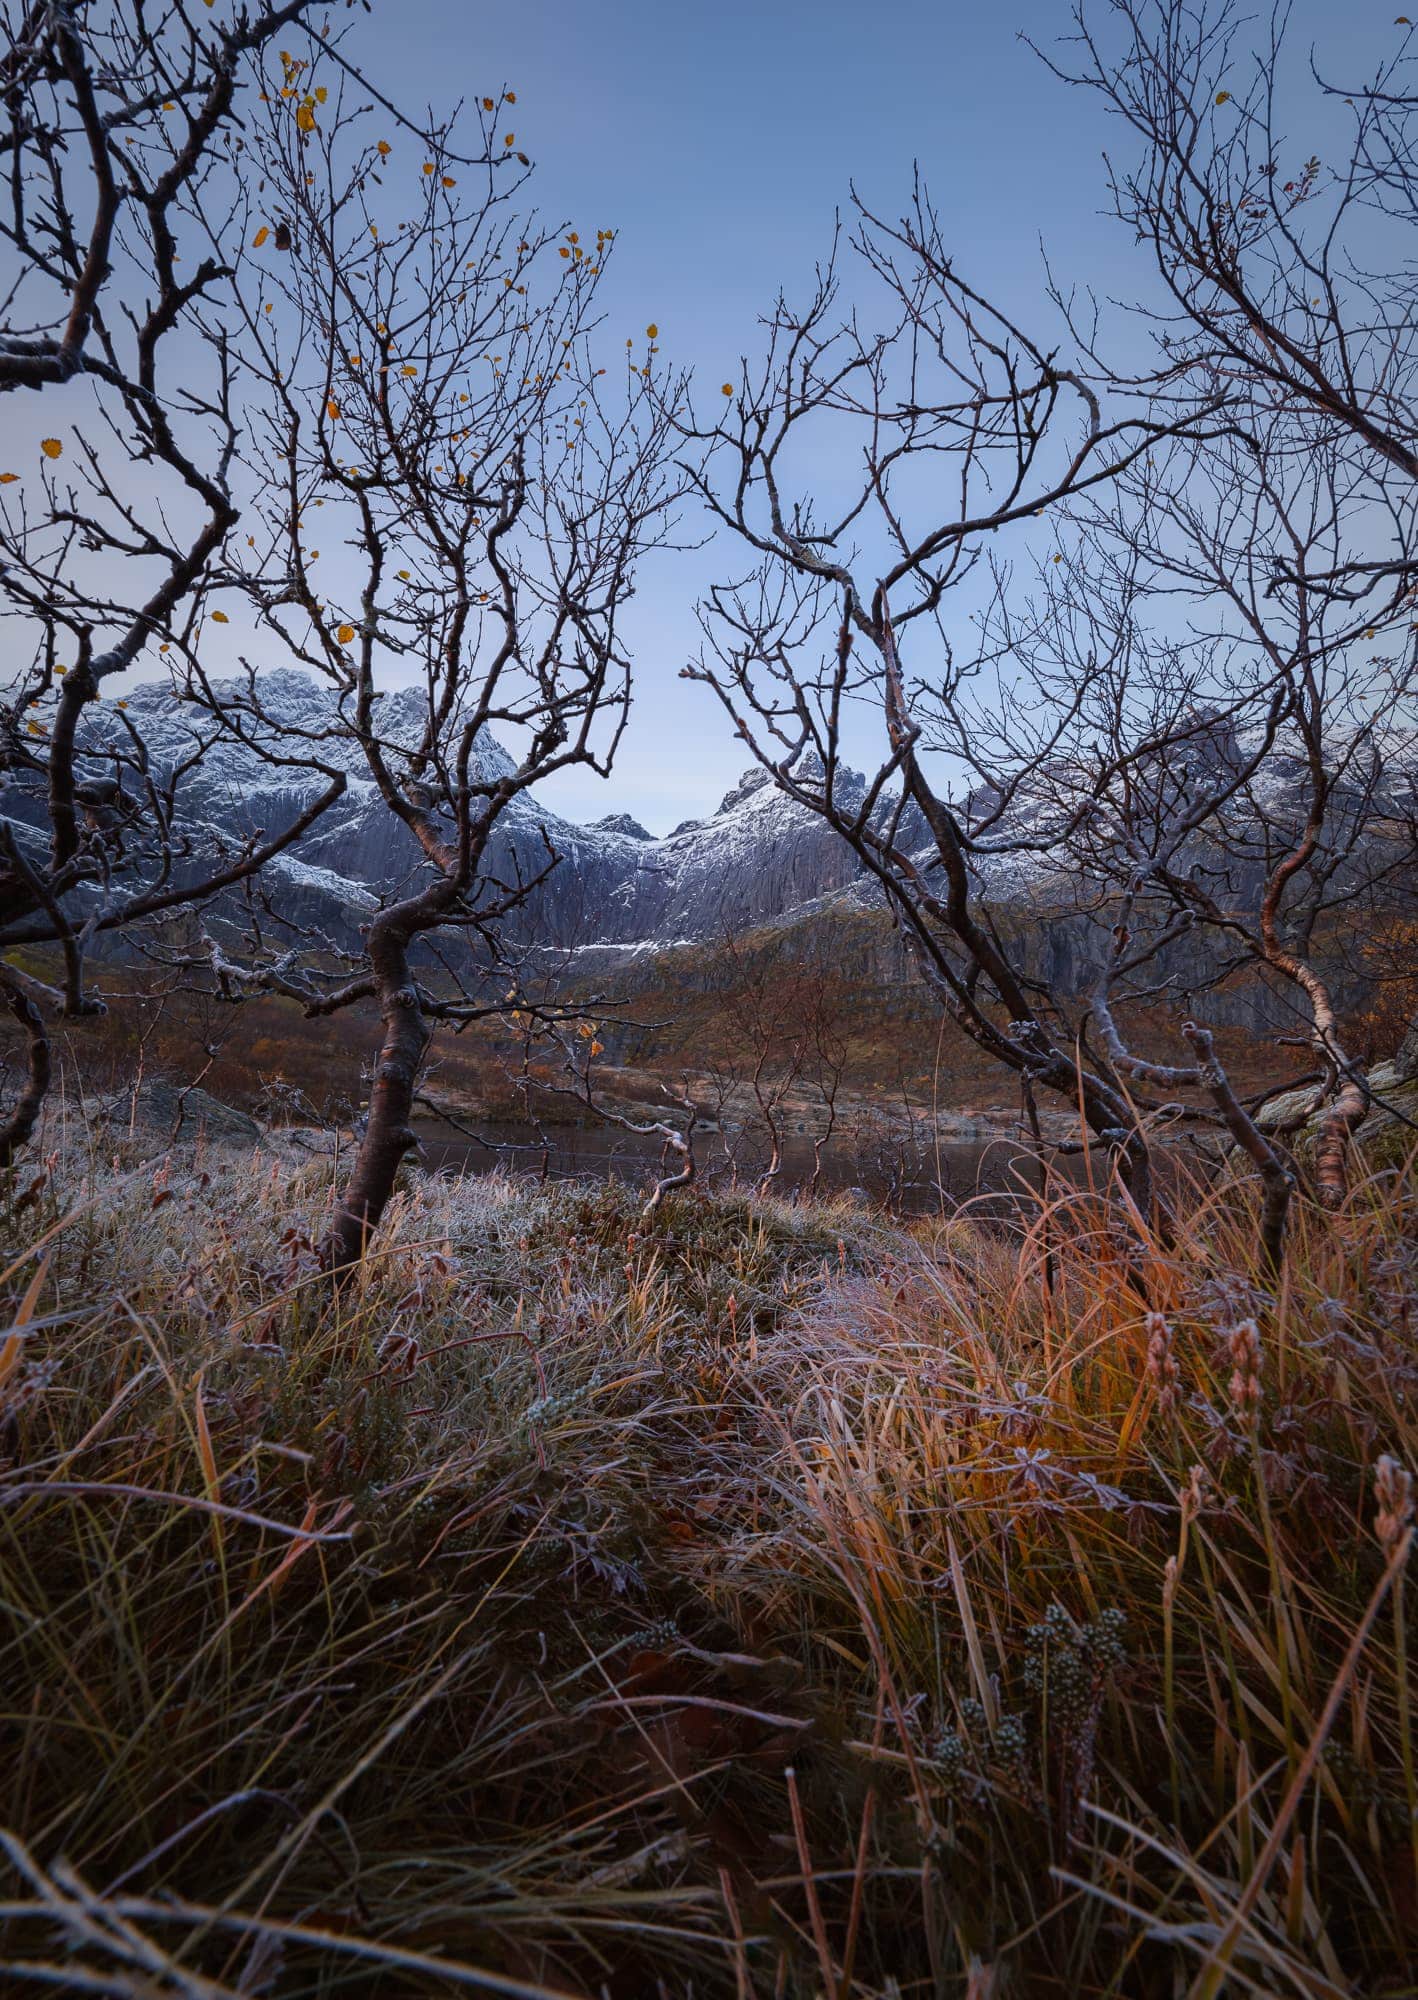 Frost-covered grass and bare trees with a few yellow leaves in the foreground, with snow-capped mountains of Lofoten, Norway, in the background.